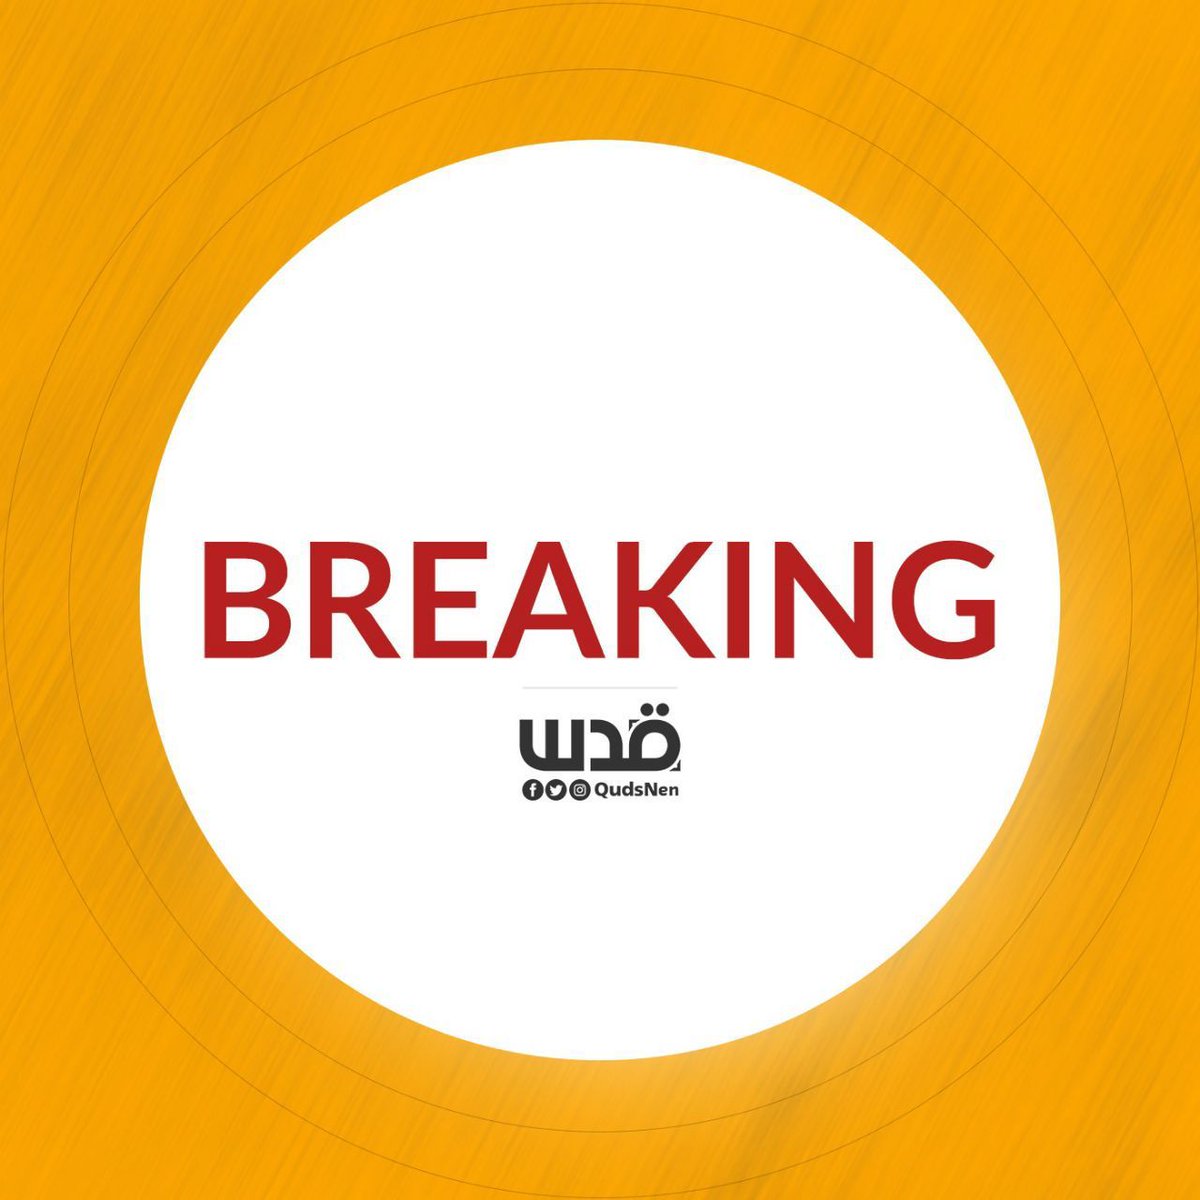 BREAKING: The Israeli occupation army destroys water wells, sewage networks, and burns schools in the Zaytoun neighborhood of Gaza City, according to local sources.